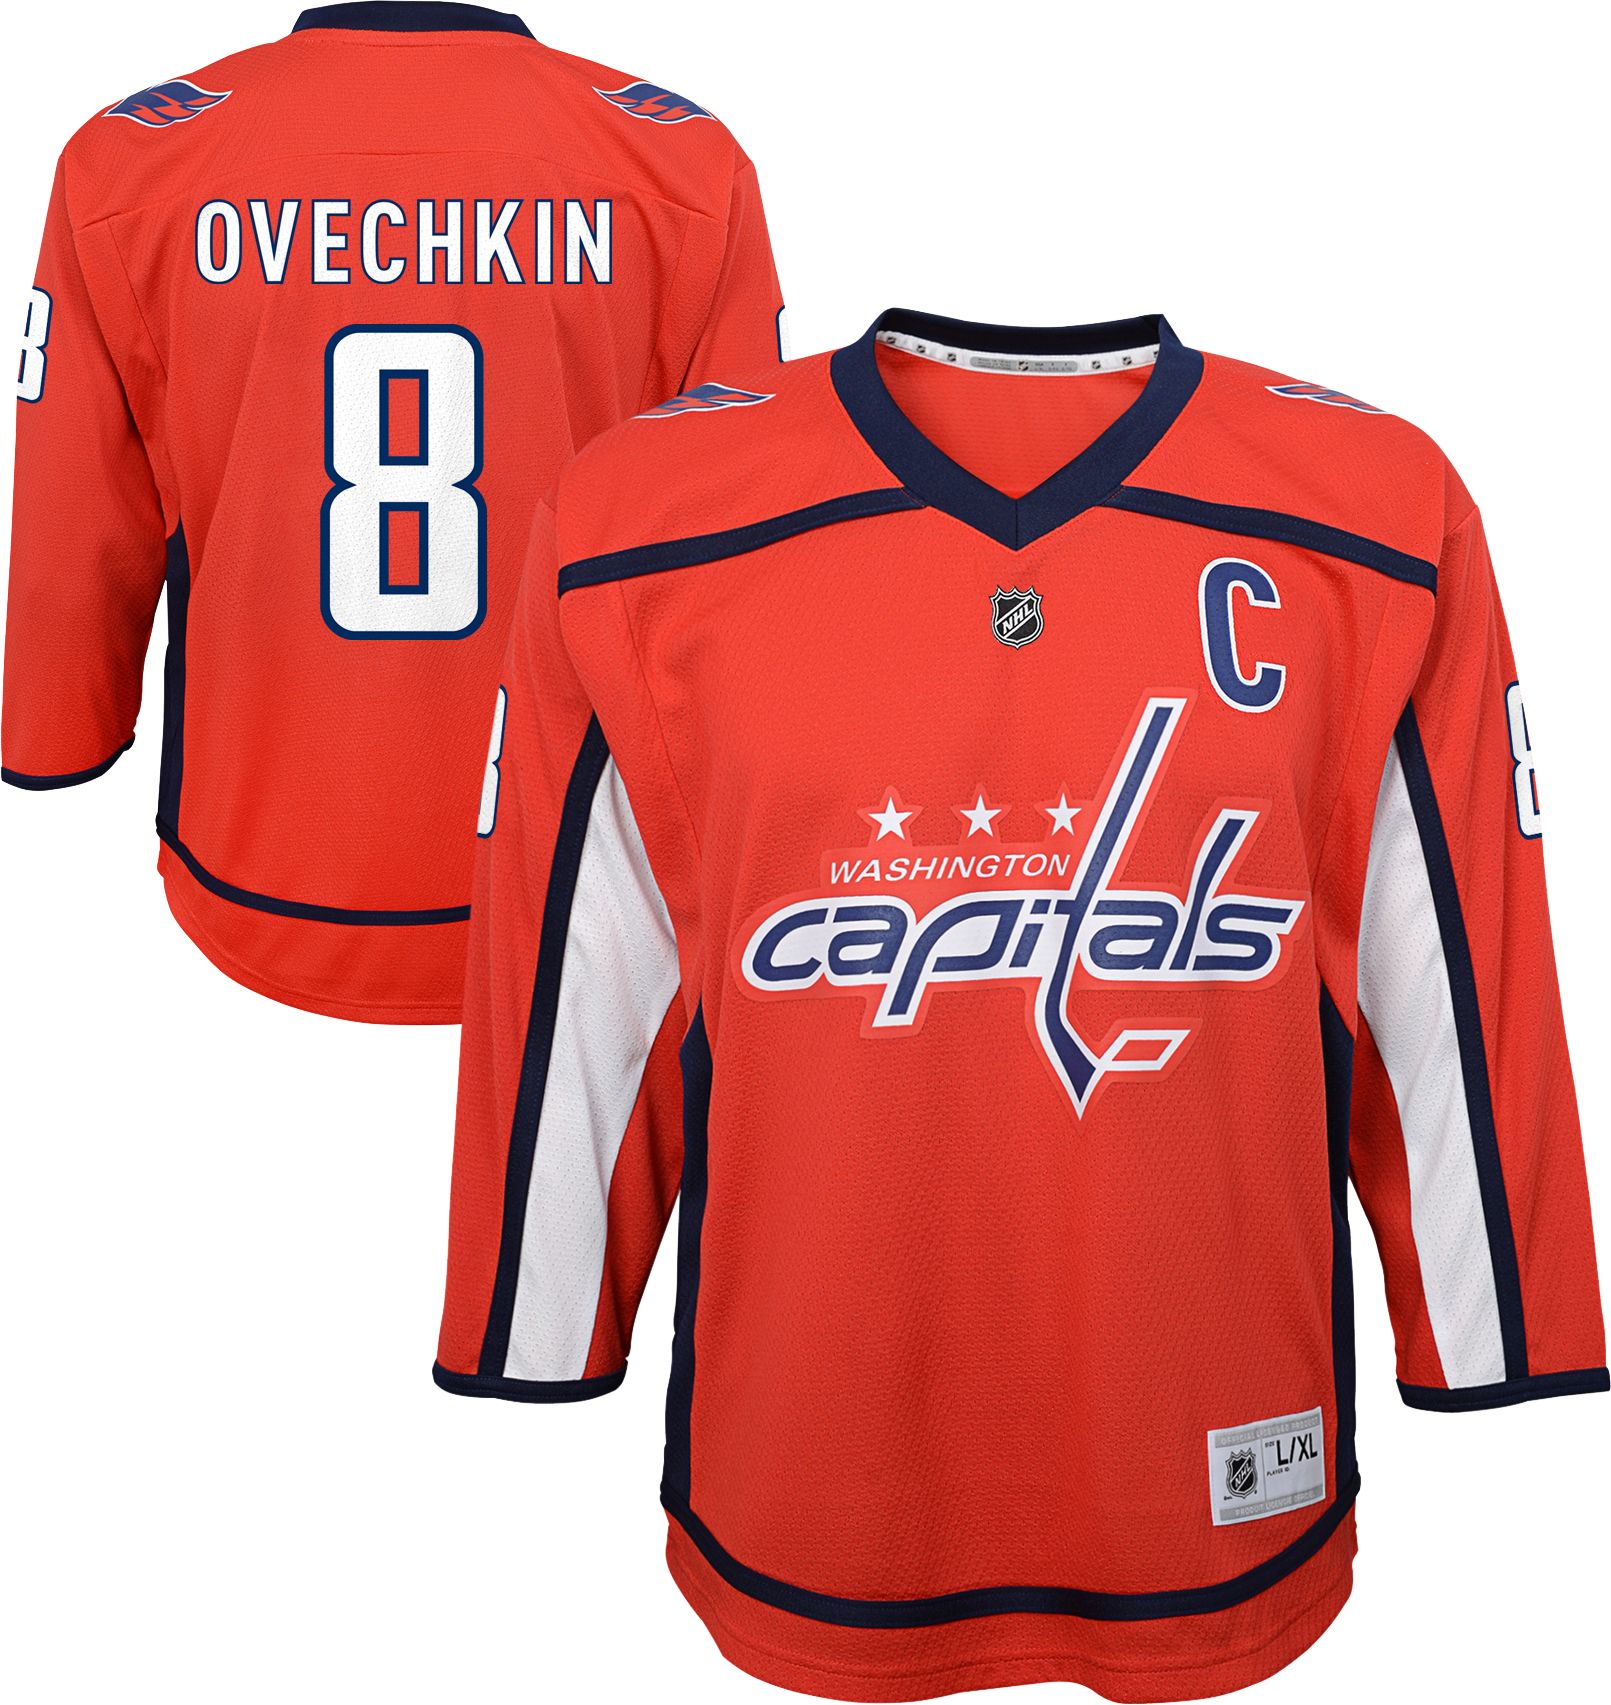 alex ovechkin youth jersey